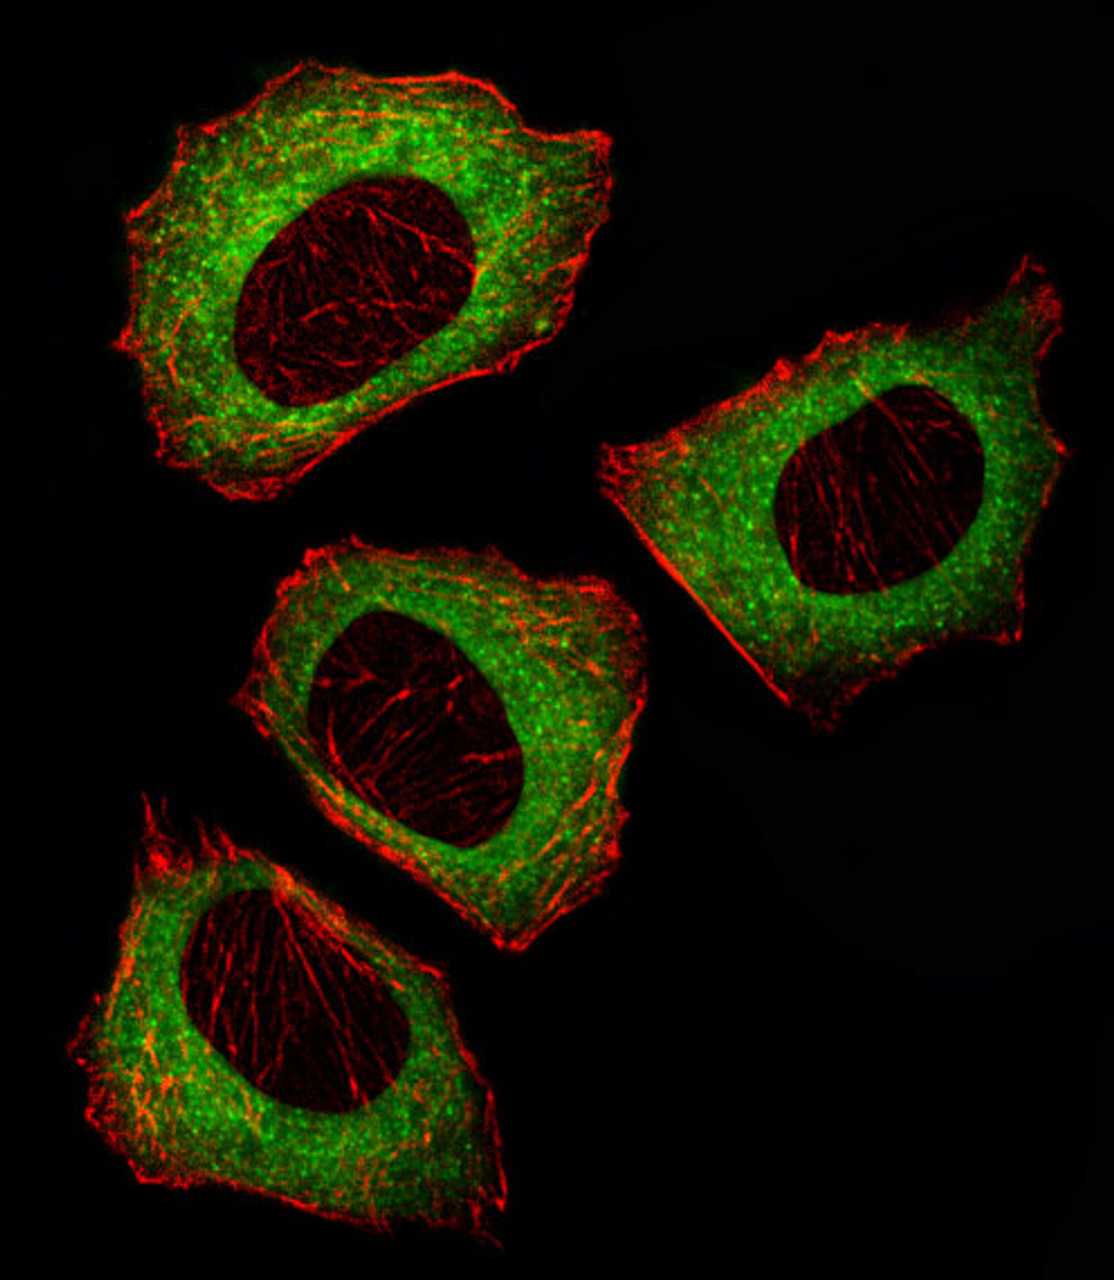 Fluorescent image of U251 cell stained with MEK2 (MAP2K2) Antibody . U251 cells were fixed with 4% PFA (20 min) , permeabilized with Triton X-100 (0.1%, 10 min) , then incubated with MEK2 primary antibody (1:25) . For secondary antibody, Alexa Fluor 488 conjugated donkey anti-rabbit antibody (green) was used (1:400) .Cytoplasmic actin was counterstained with Alexa Fluor 555 (red) conjugated Phalloidin (7units/ml) . MEK2 immunoreactivity is localized to Cytoplasm significantly.